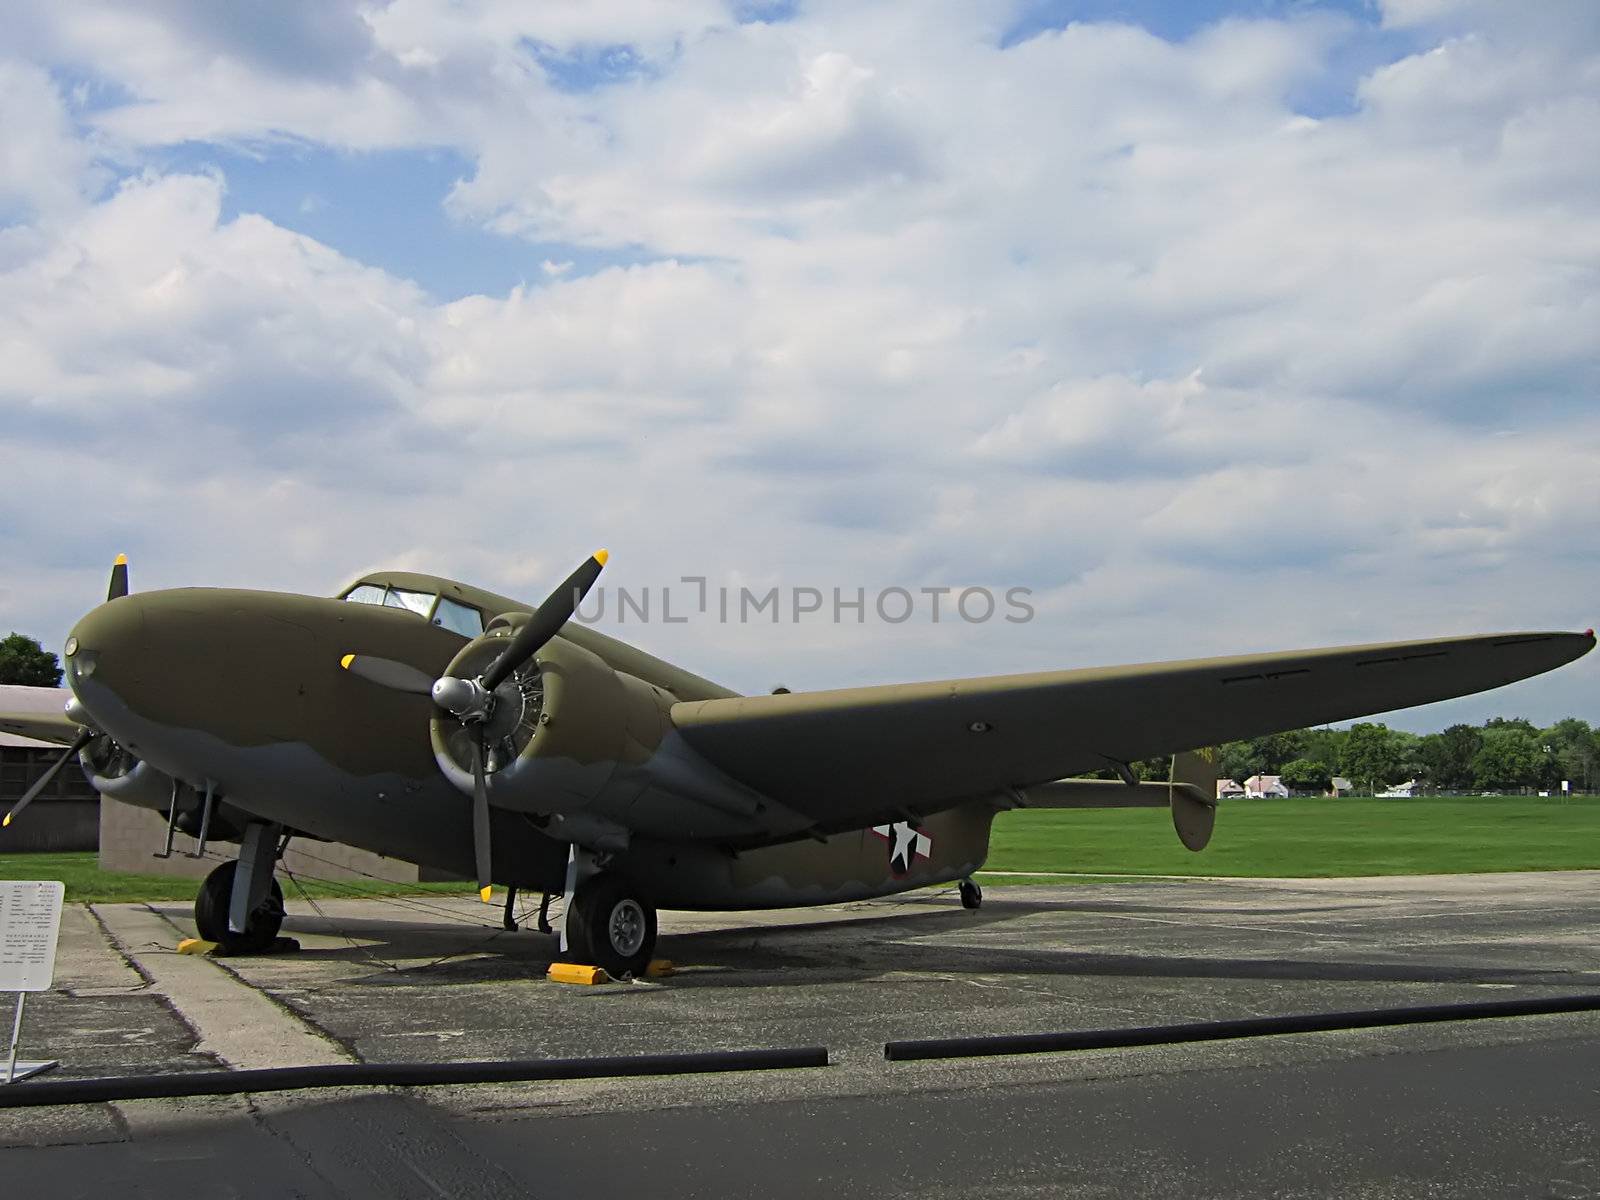 A photograph of a vintage military airplane.